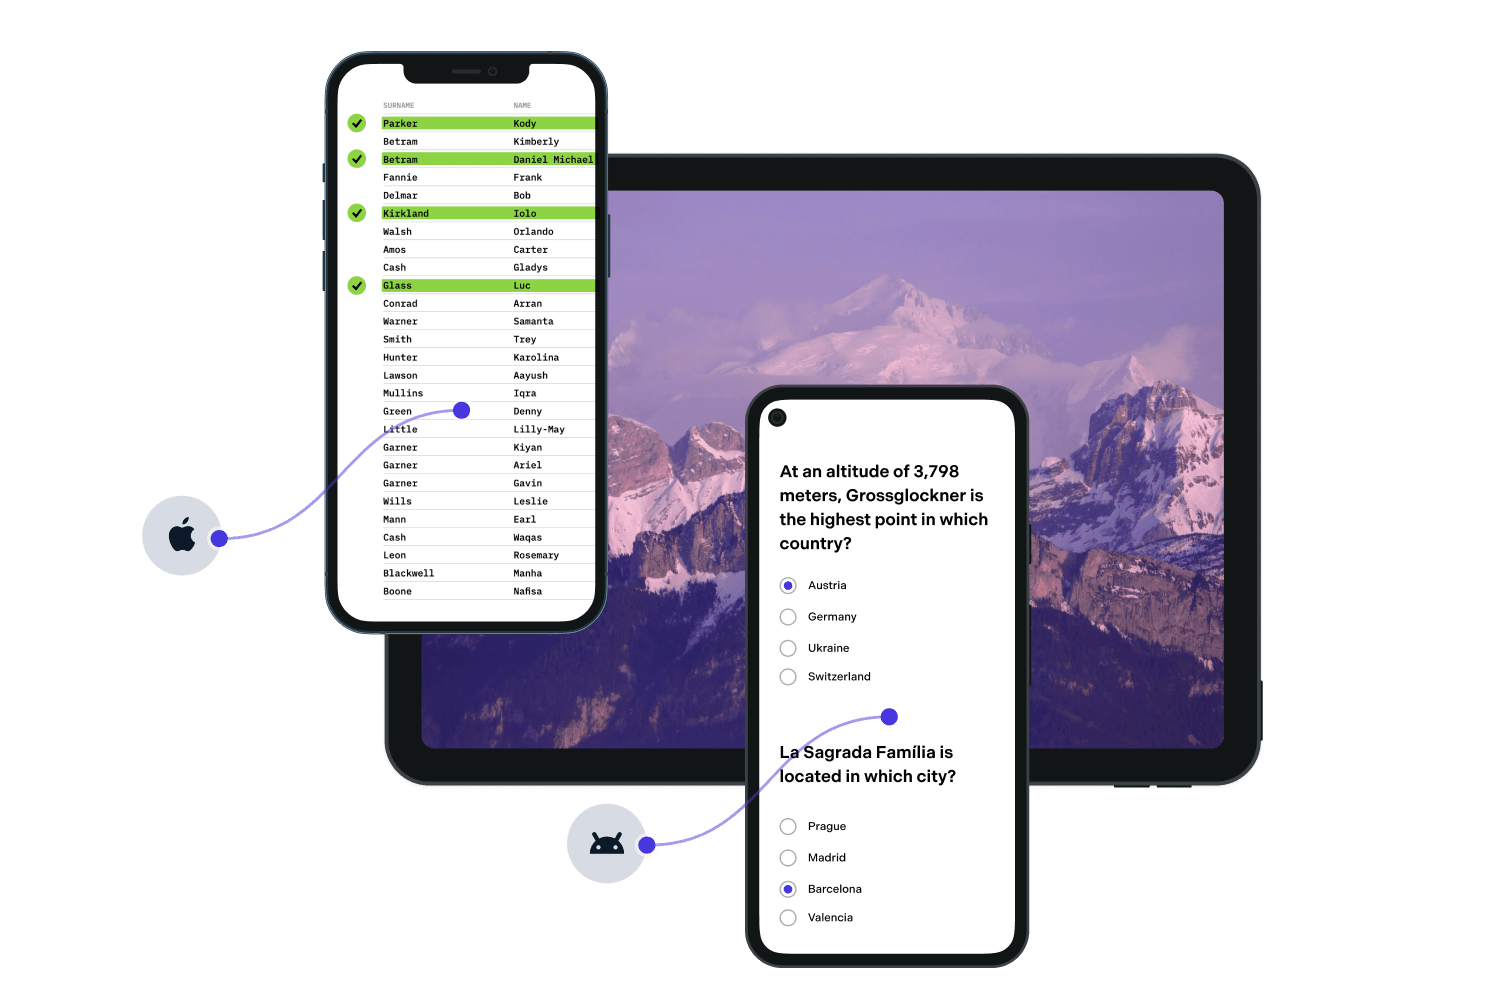 Picture of tablet with image of mountains, Android phone with a document with form fields, and iPhone with a document with highlight and stamp annotations.